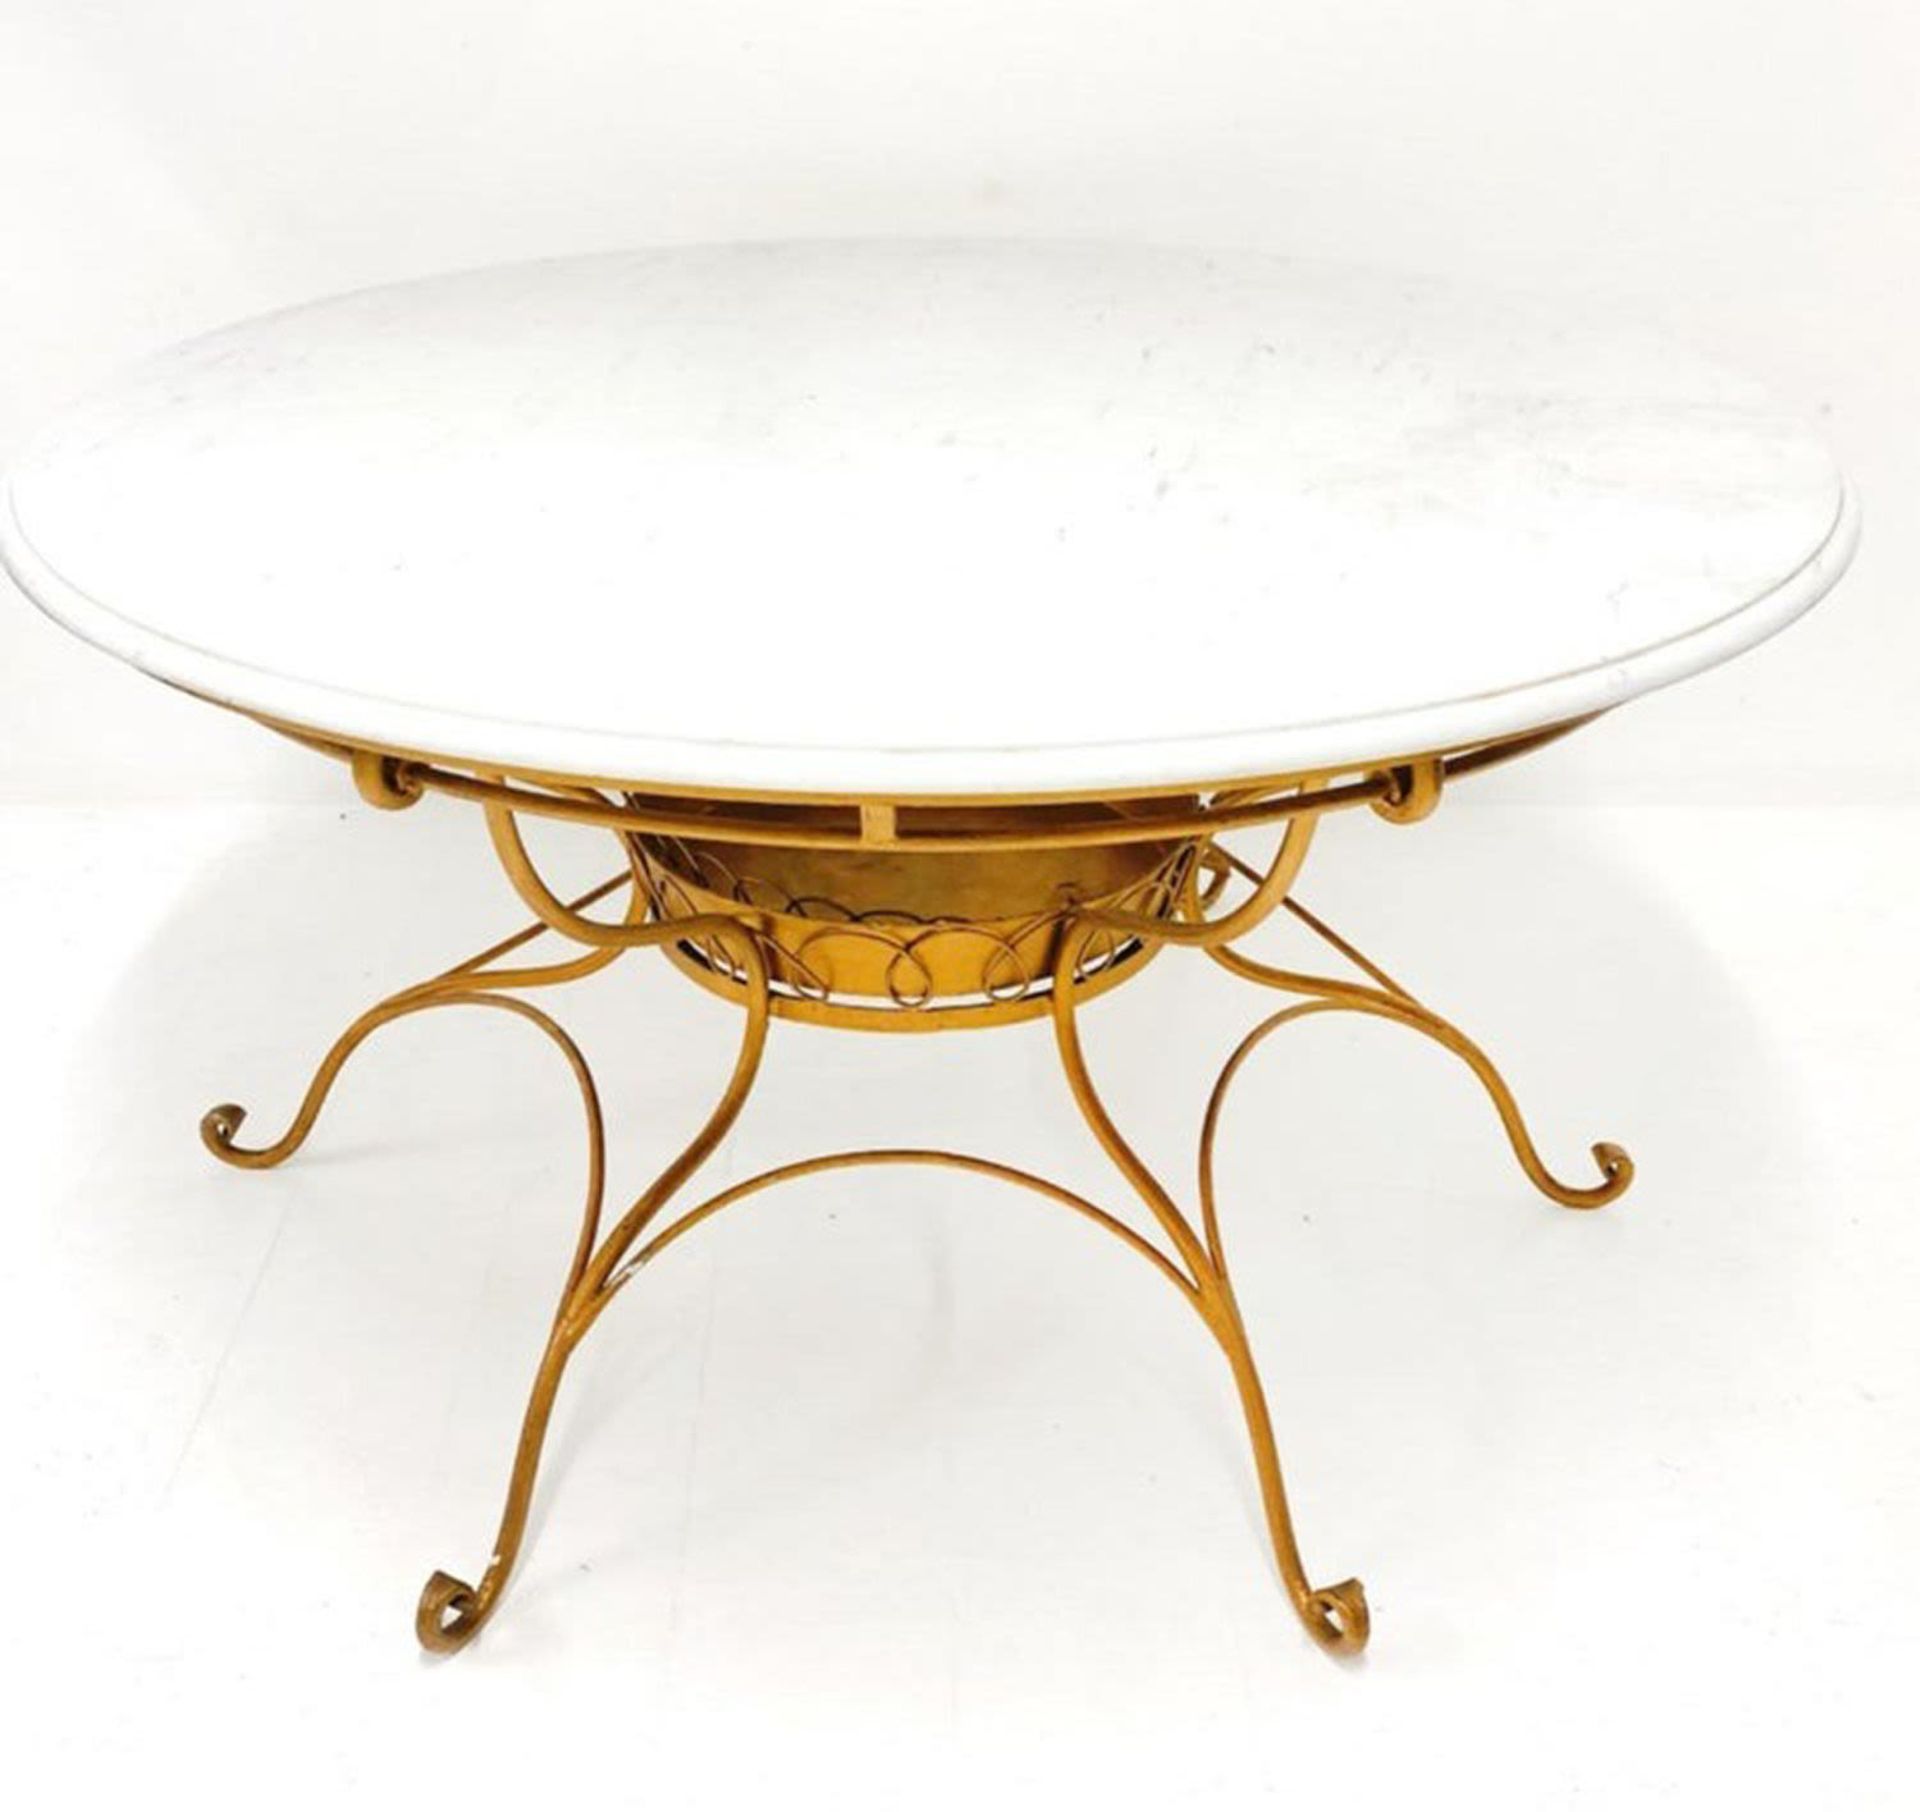 Italian table "Años 40" in golden wrought iron and marble top - Image 2 of 6